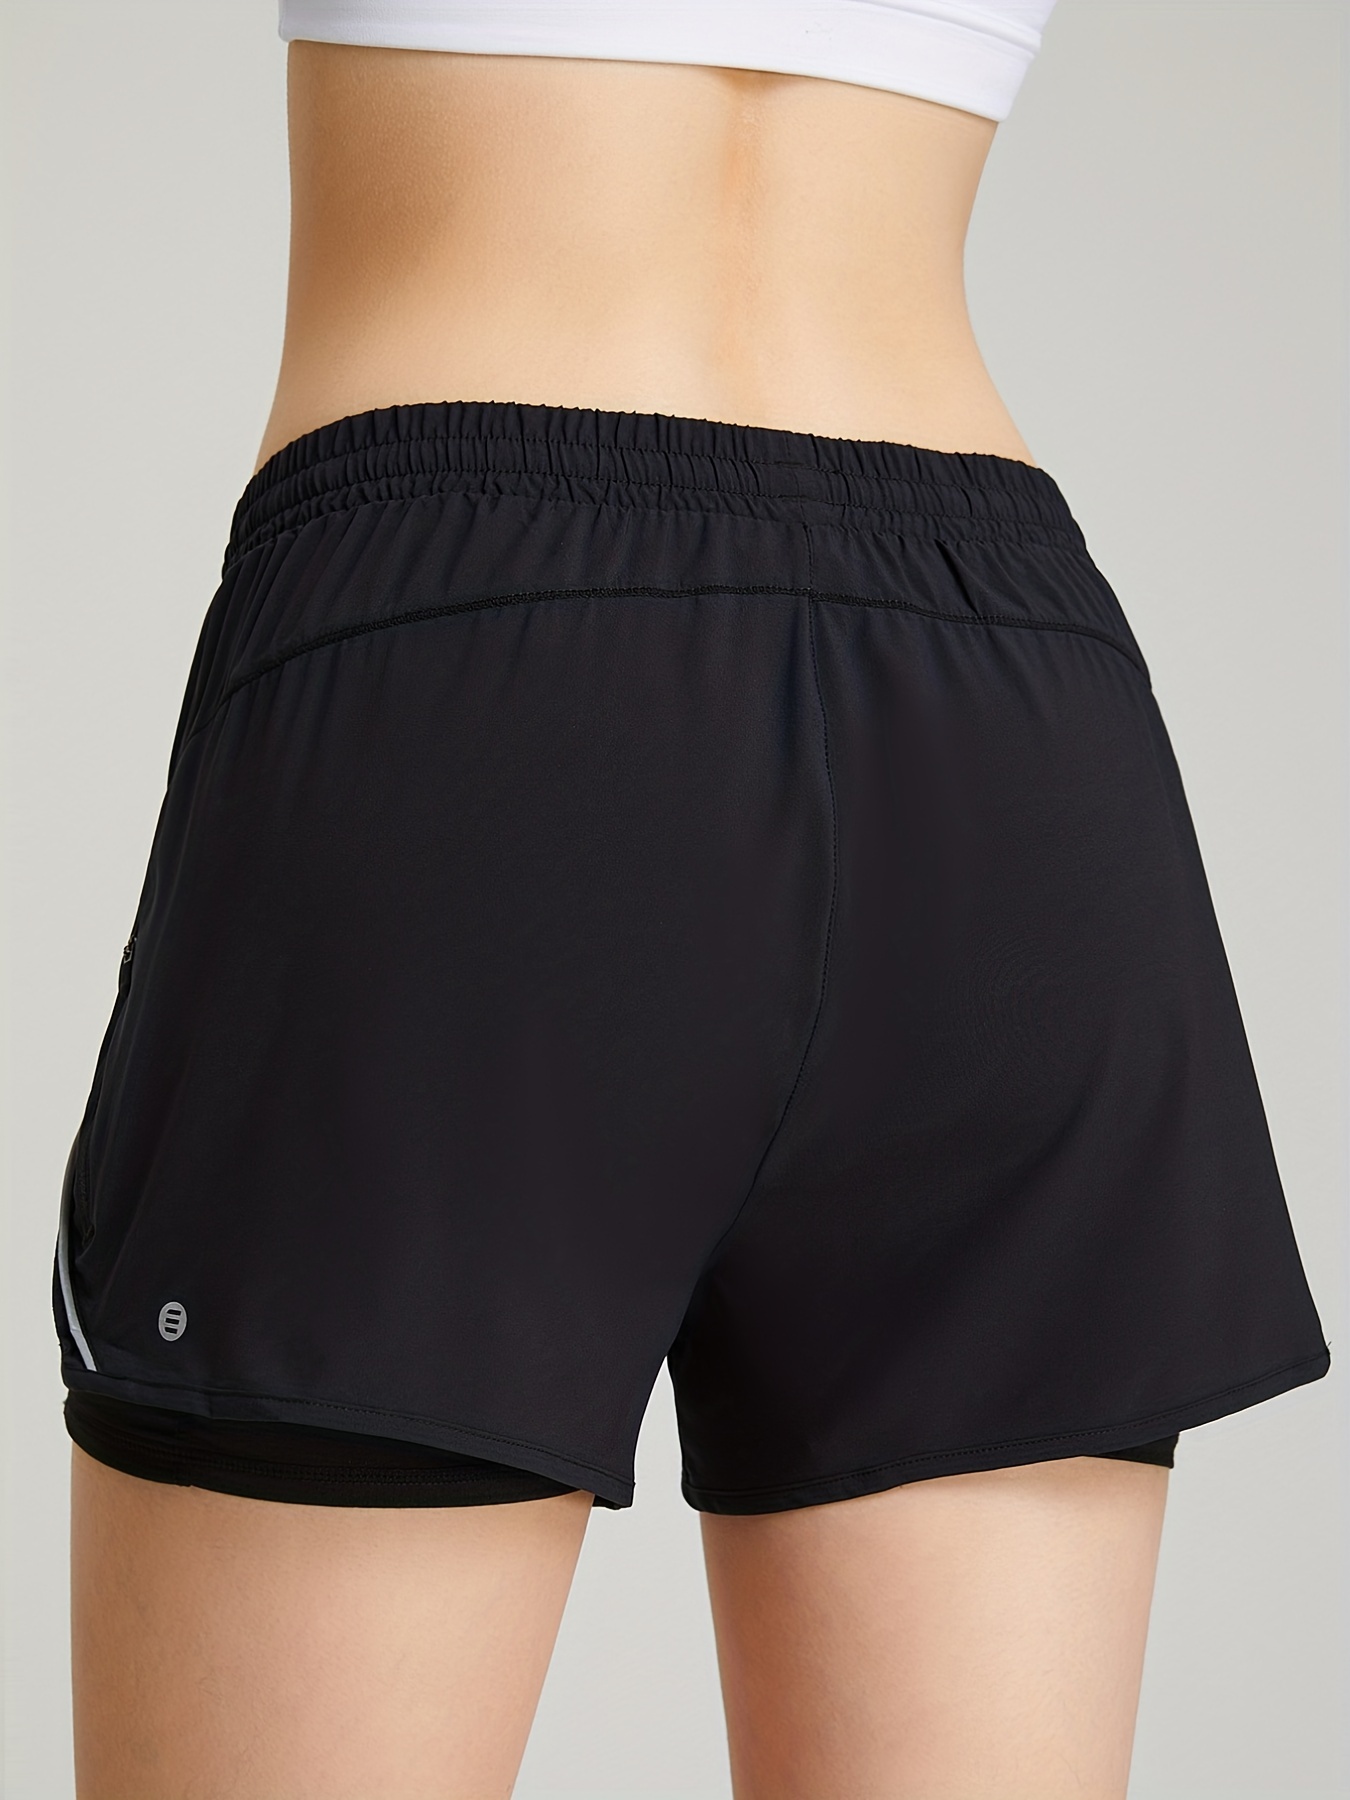 Black 2 In 1 Running Shorts High Waist Side Zippered Pockets Outdoor Sports  Shorts Womens Activewear, Check Out Today's Deals Now